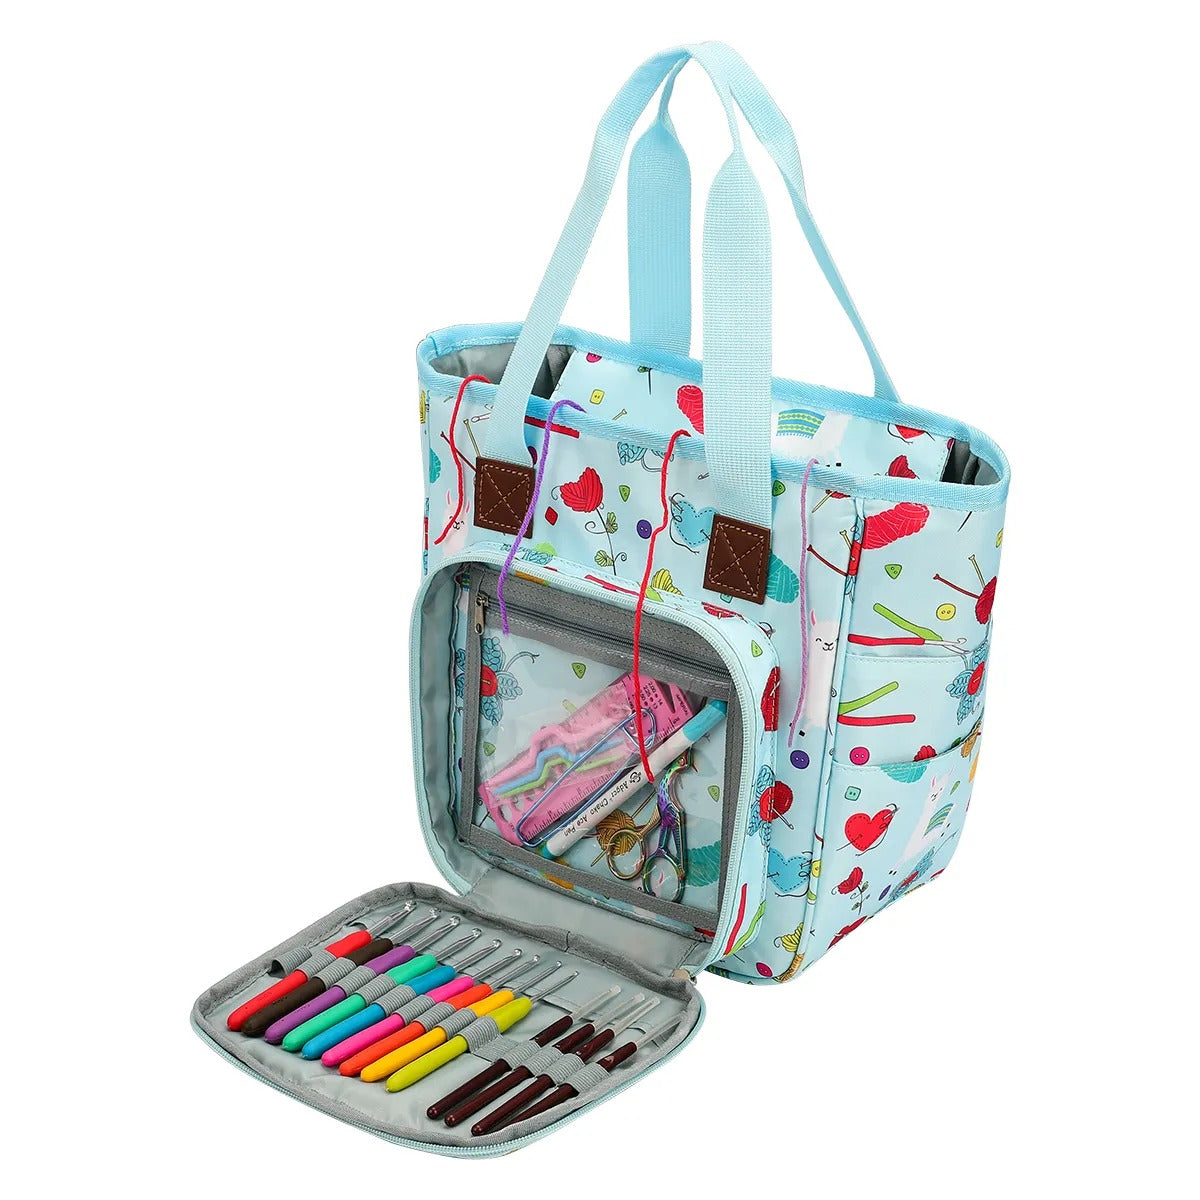 Open Yarn Organizer tote bag with colored markers displayed in front pocket.